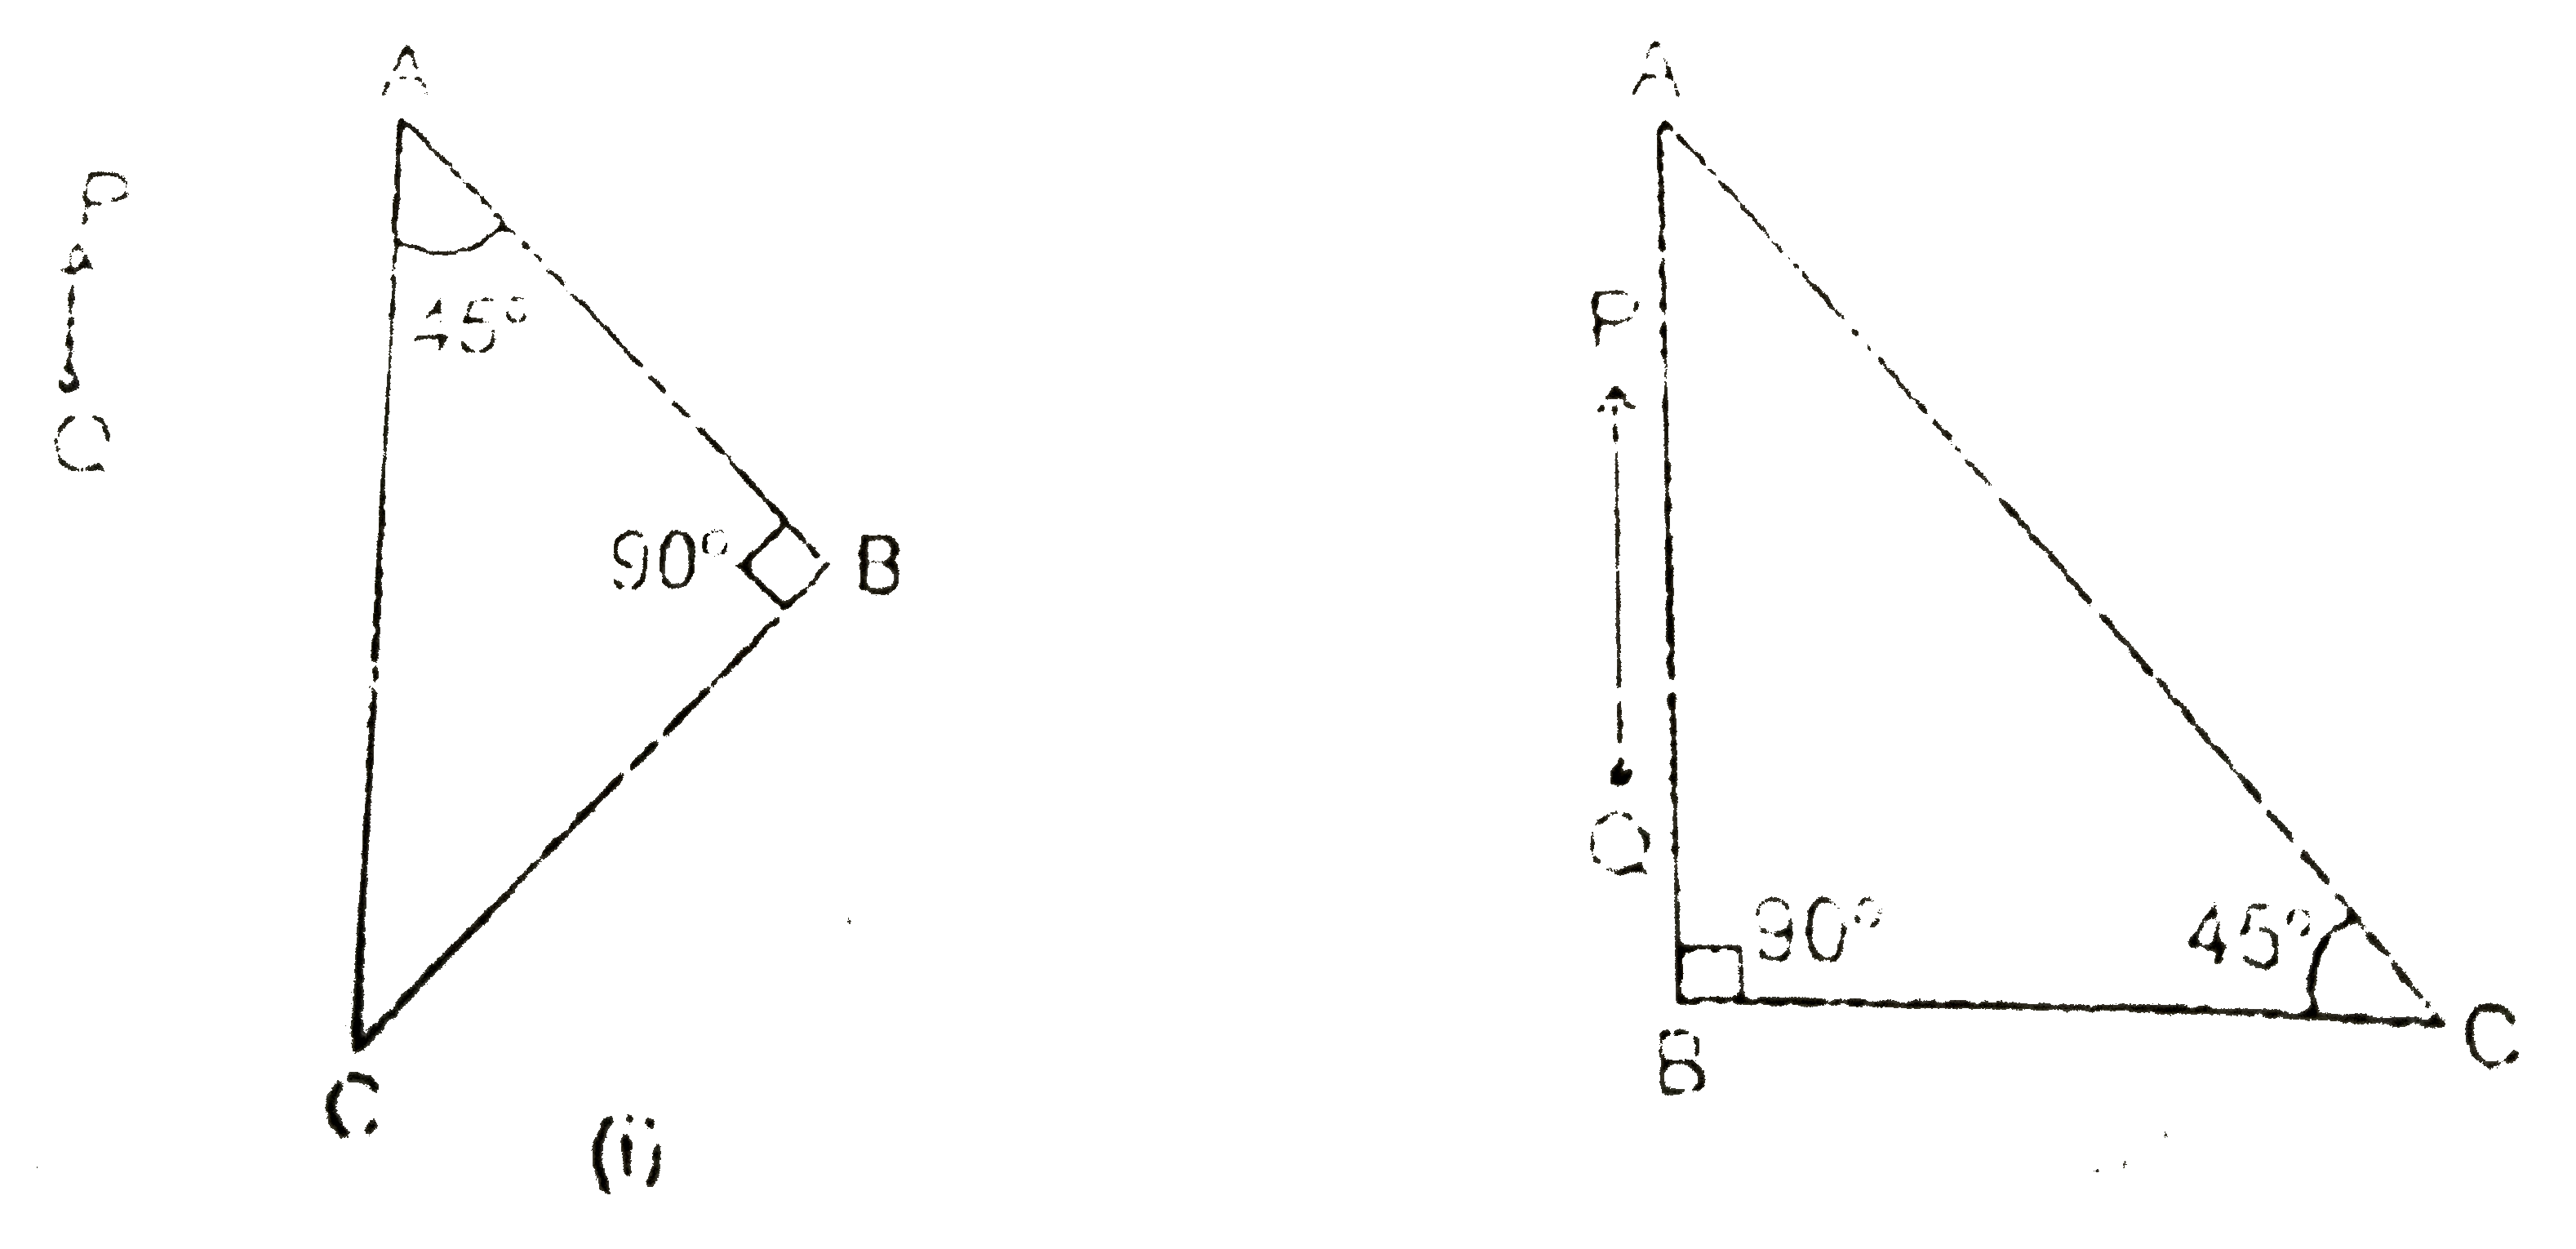 A right-angle crown glass prism with critical angle 41^(@) is placed berore an object, PQ, in two position as shown in the figure (i) and (ii). Trace the paths of the rays from P and Q passing through the prism in the two cases.